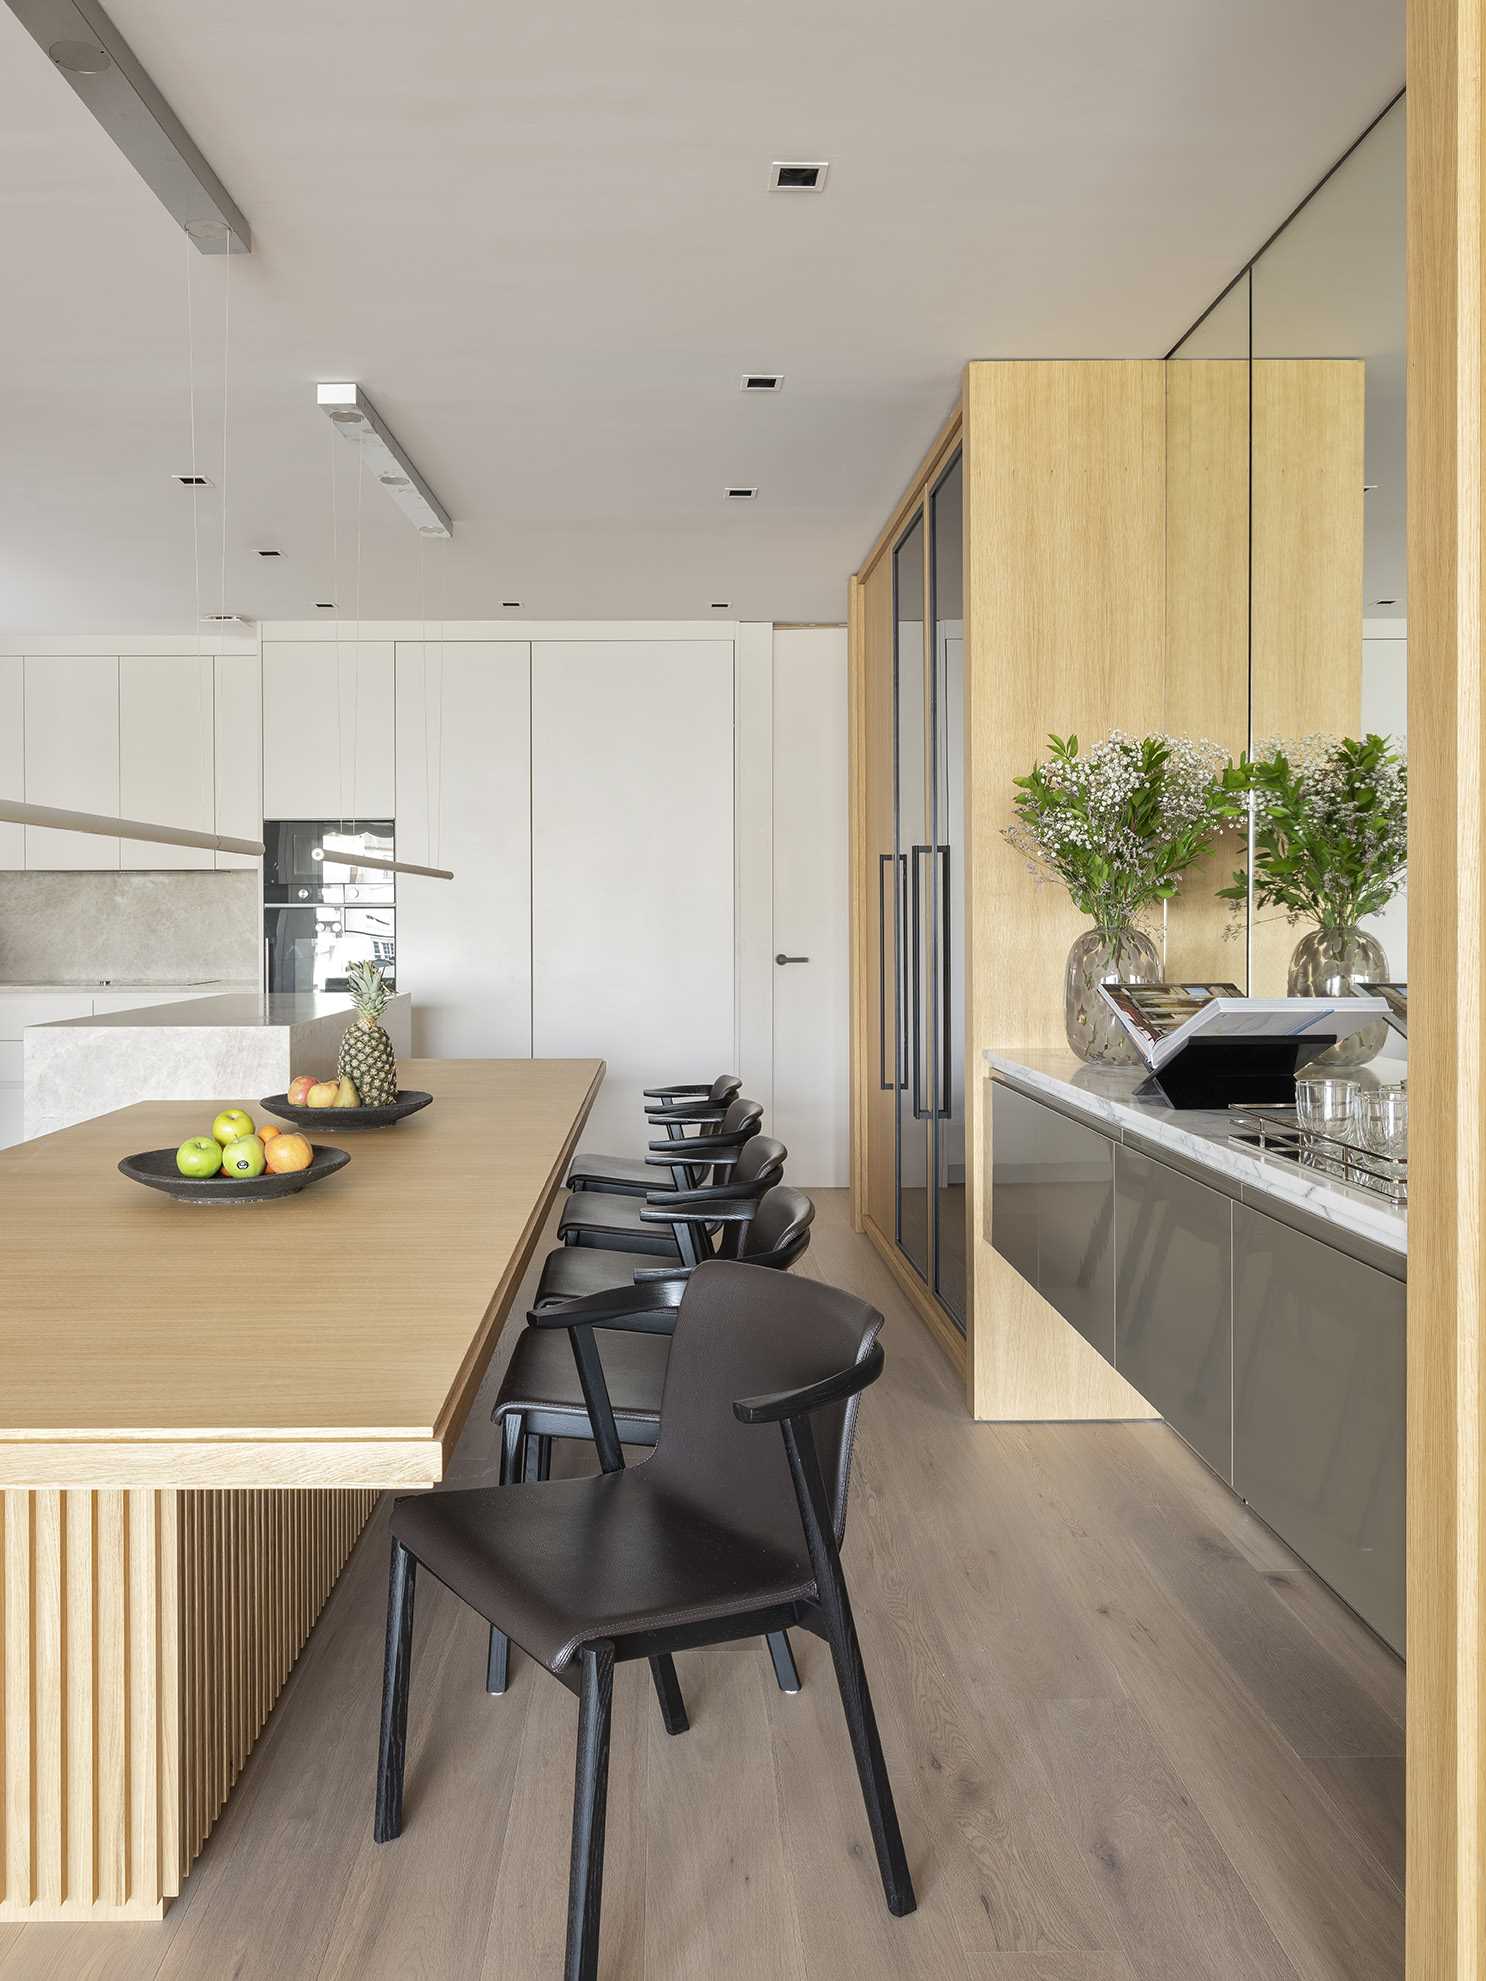 An open and spacious kitchen layout has been designed to invite engagement, where a marble bar and a long wooden dining table play host. A mirrored wall has also been included in this space.